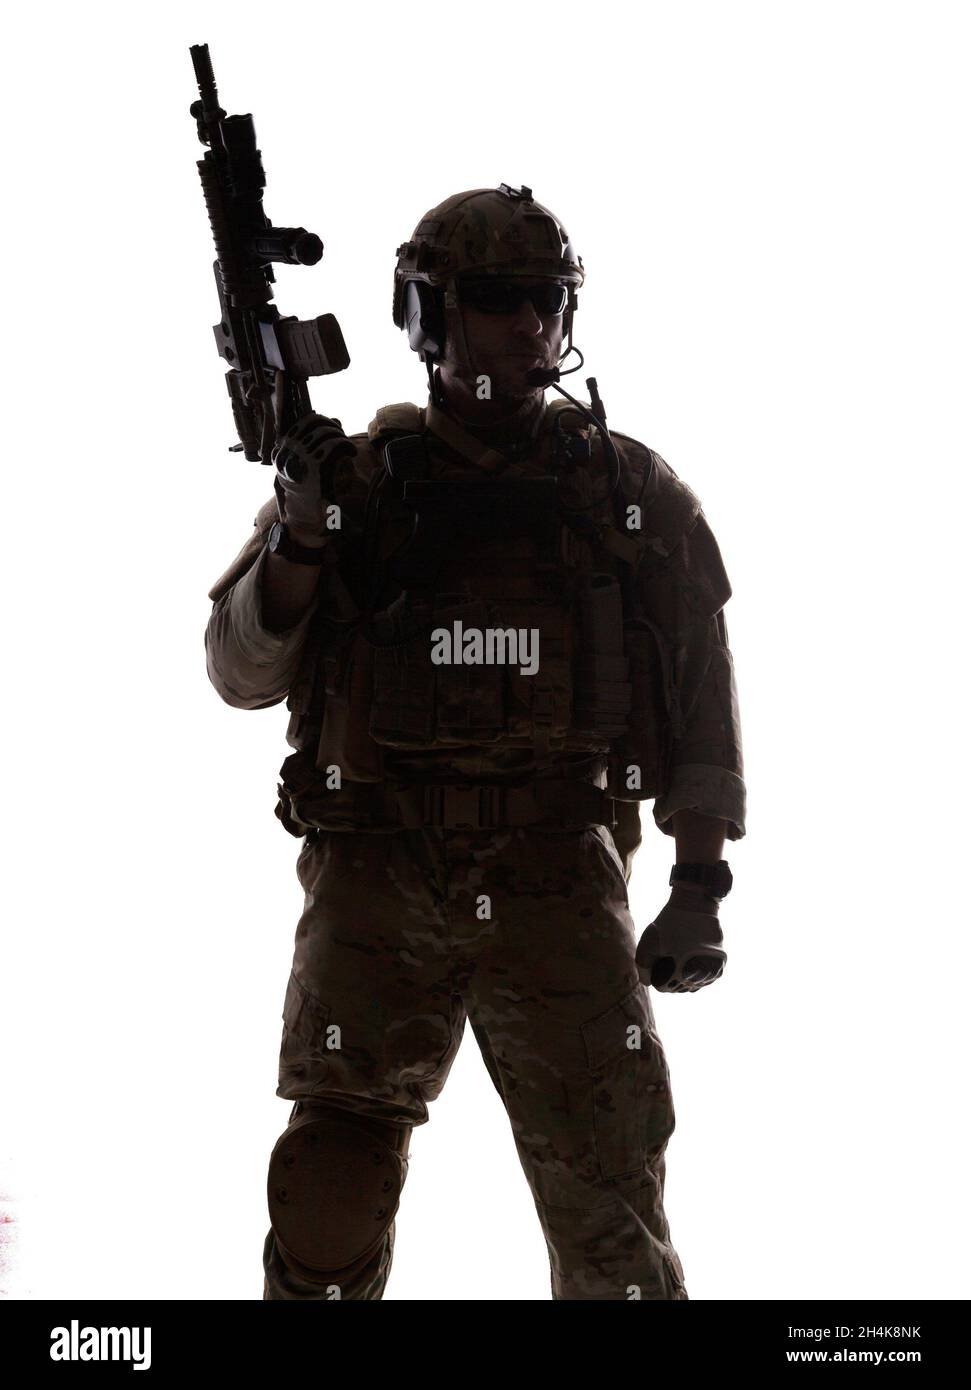 Marine Special Ops High Resolution Stock Photography and Images - Alamy